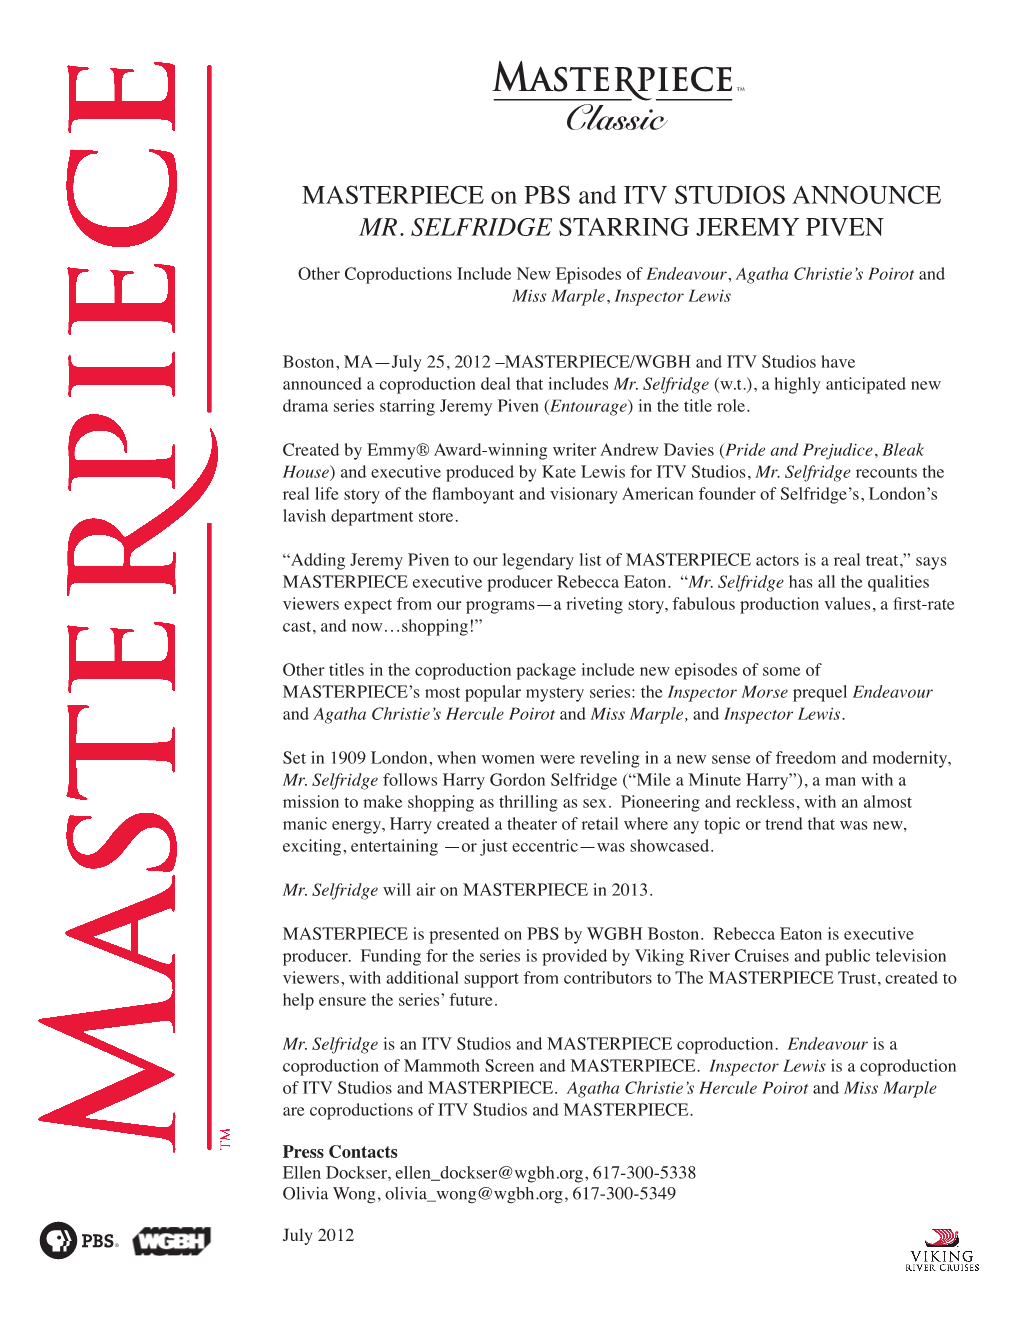 MASTERPIECE on PBS and ITV STUDIOS ANNOUNCE MR